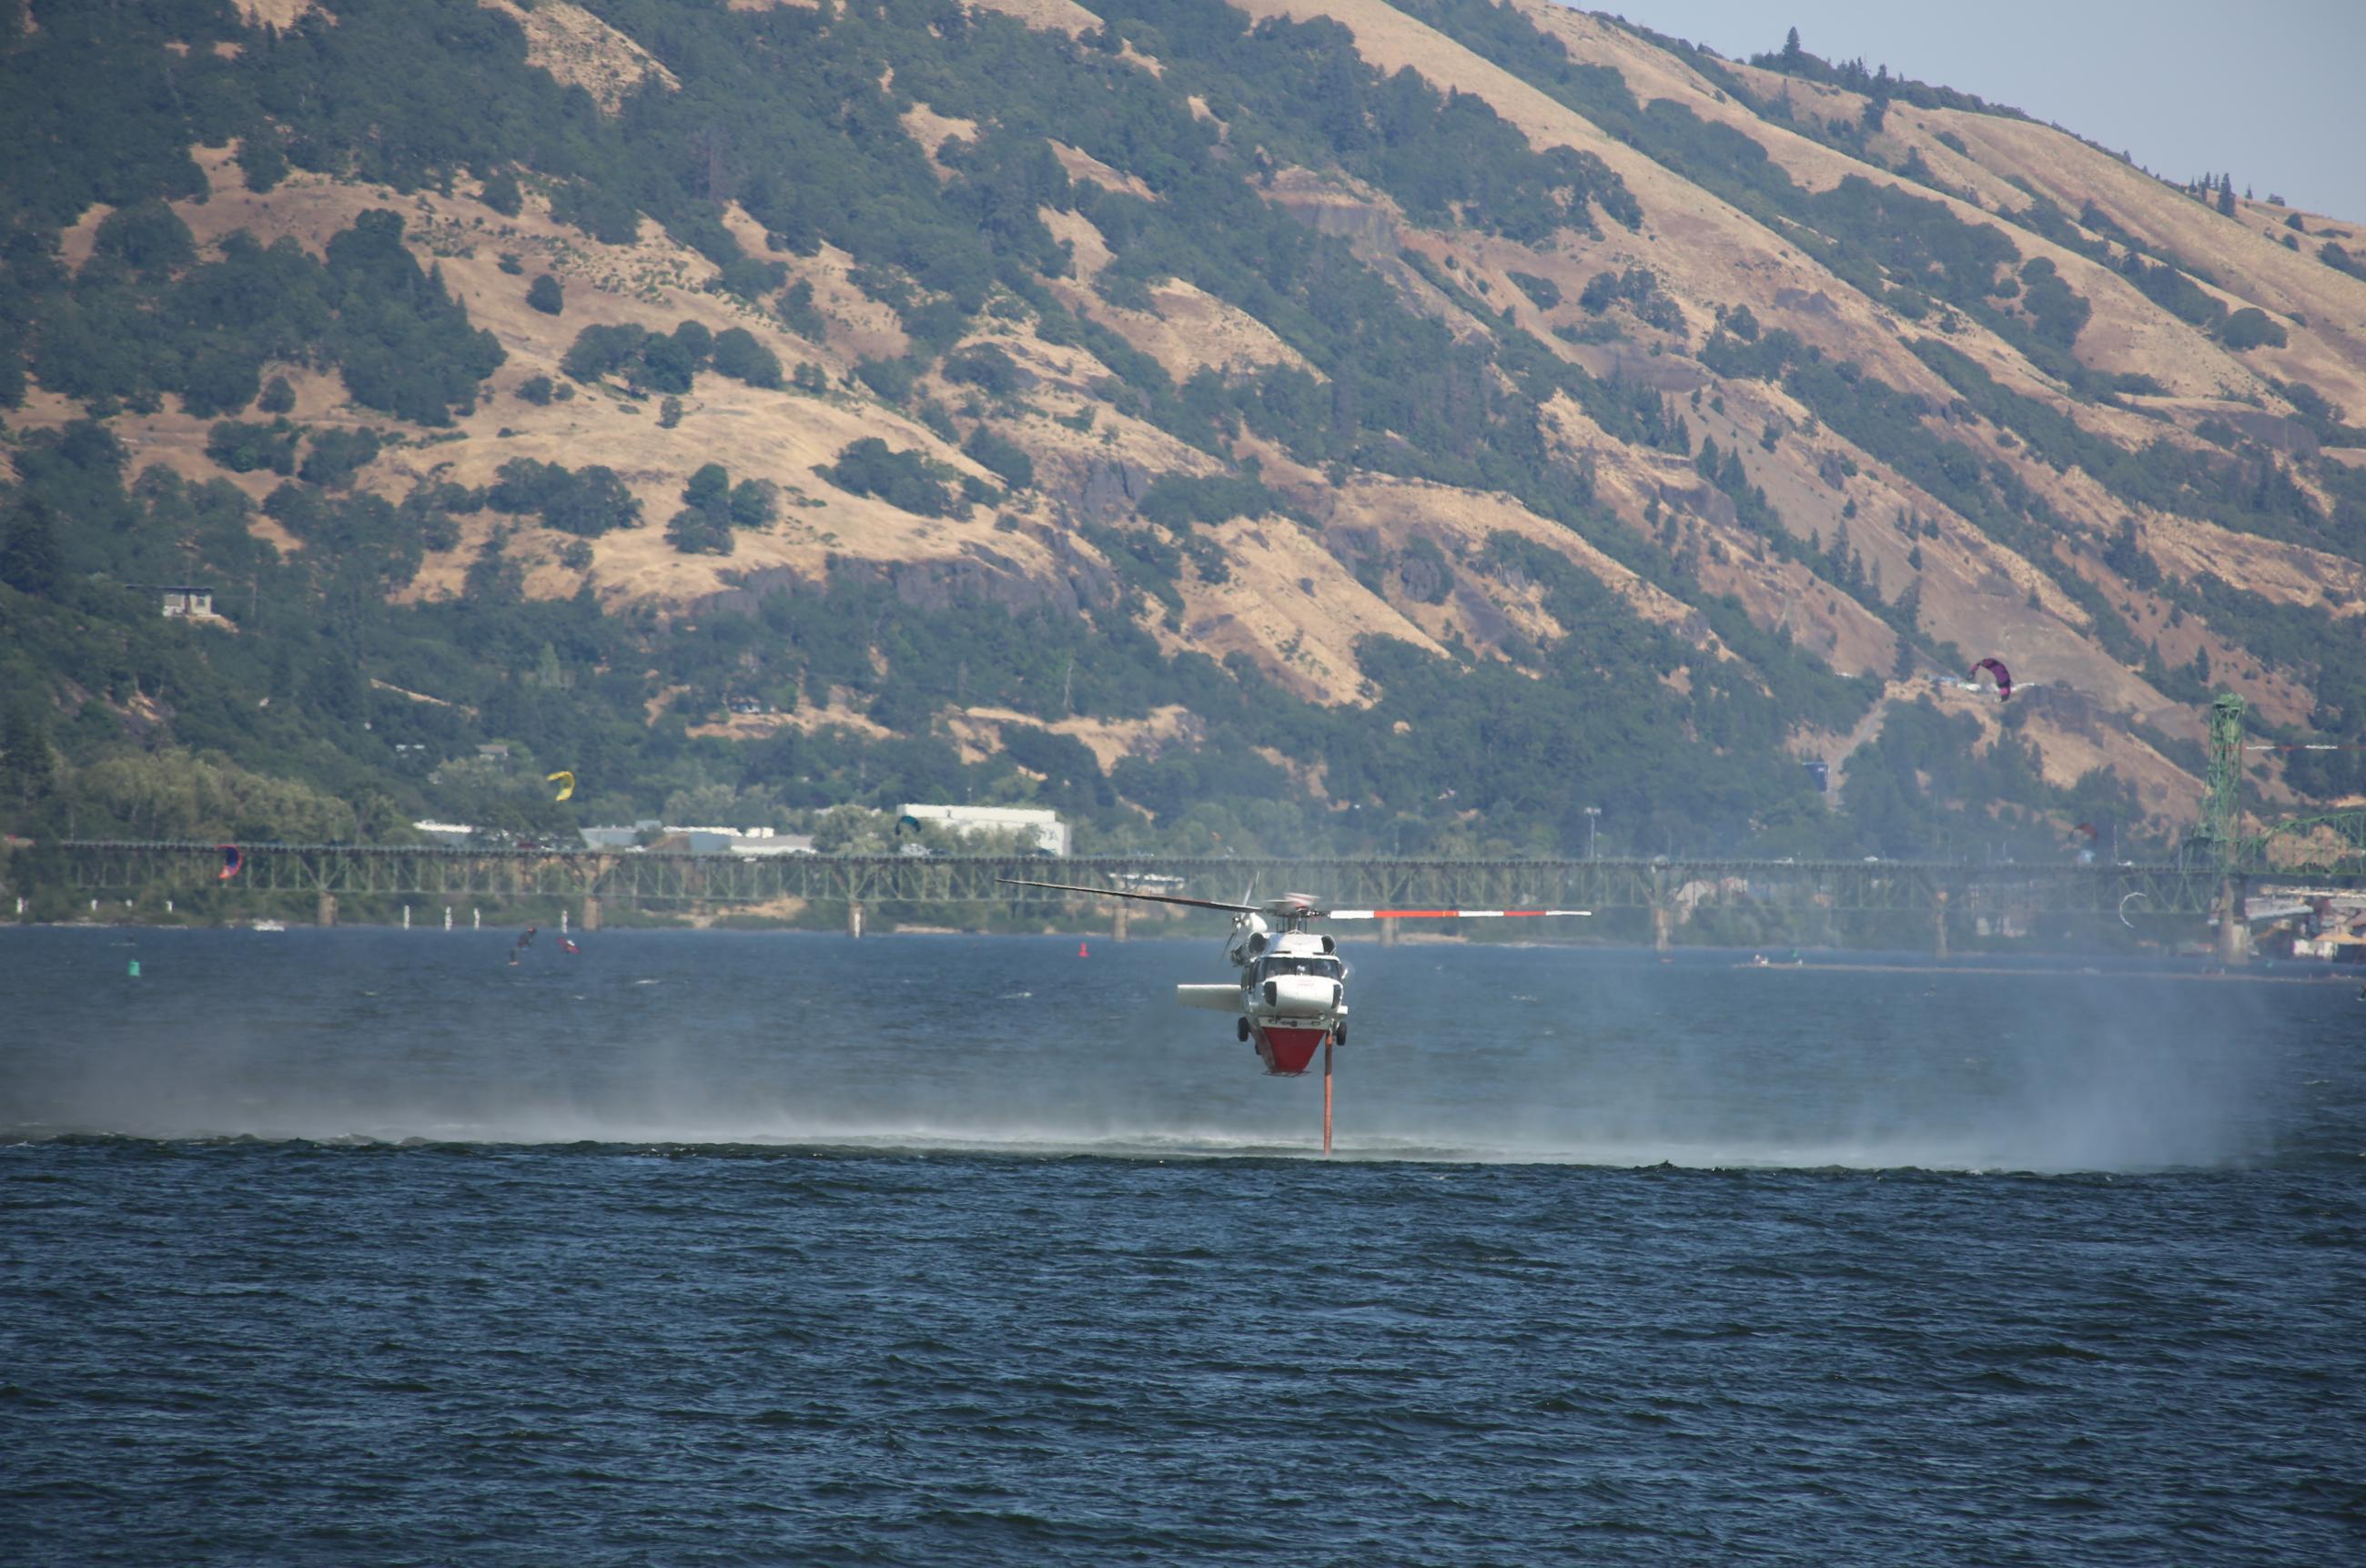 Helicopter dipping for water in the Columbia River.